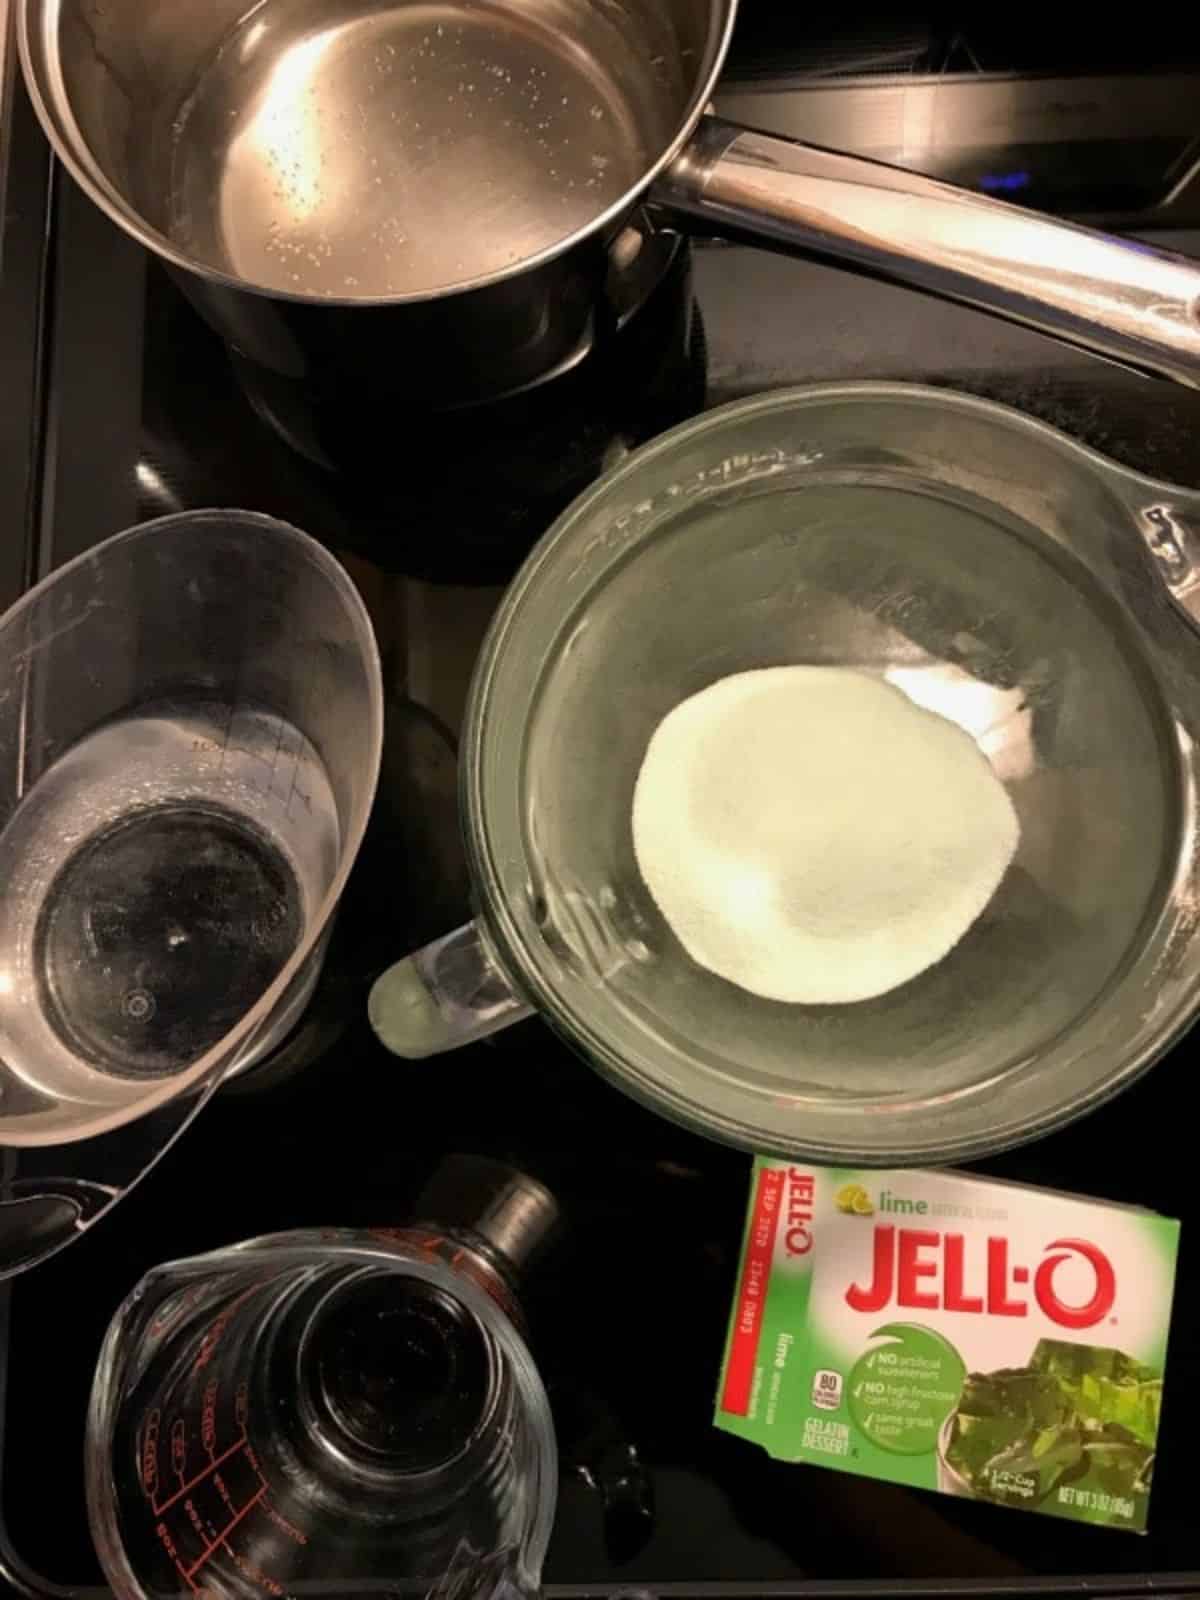 measuring cups and pans full of water and jello, and a box of green jello.